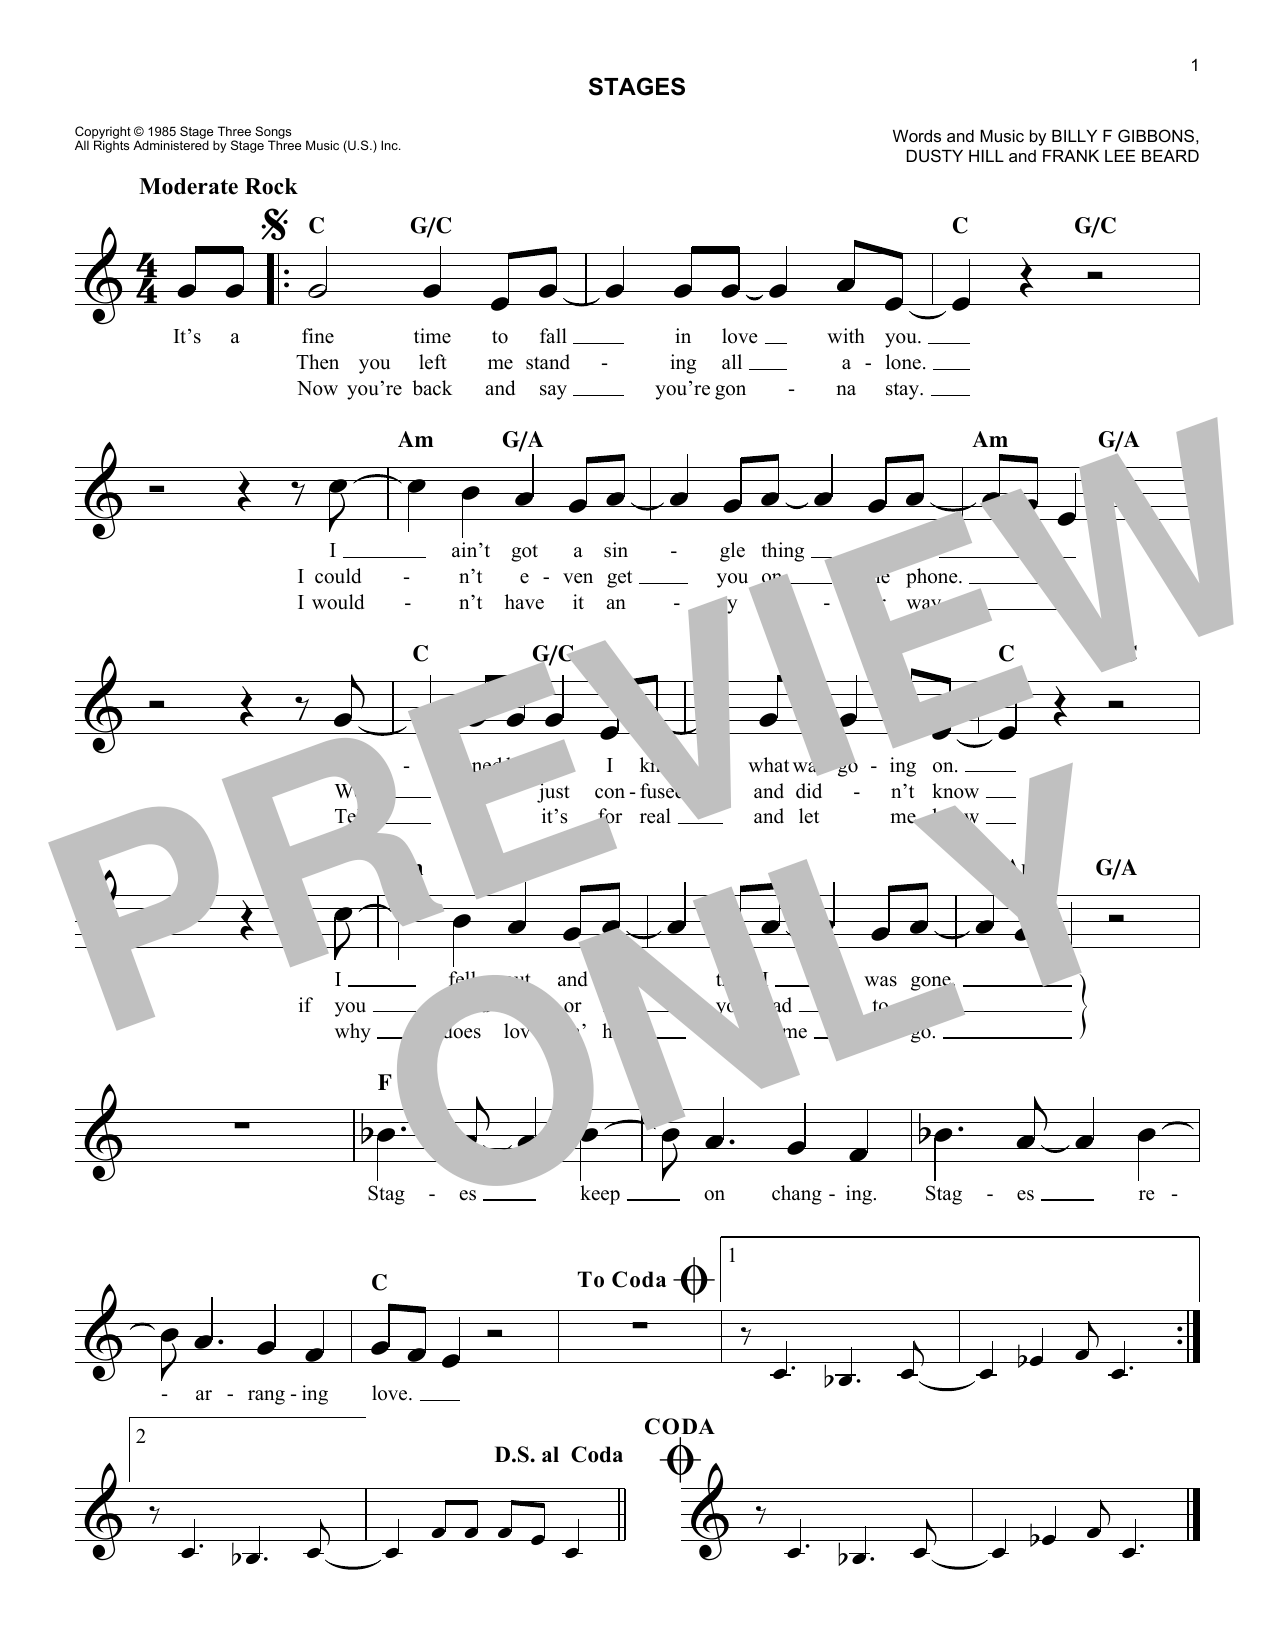 Download ZZ Top Stages Sheet Music